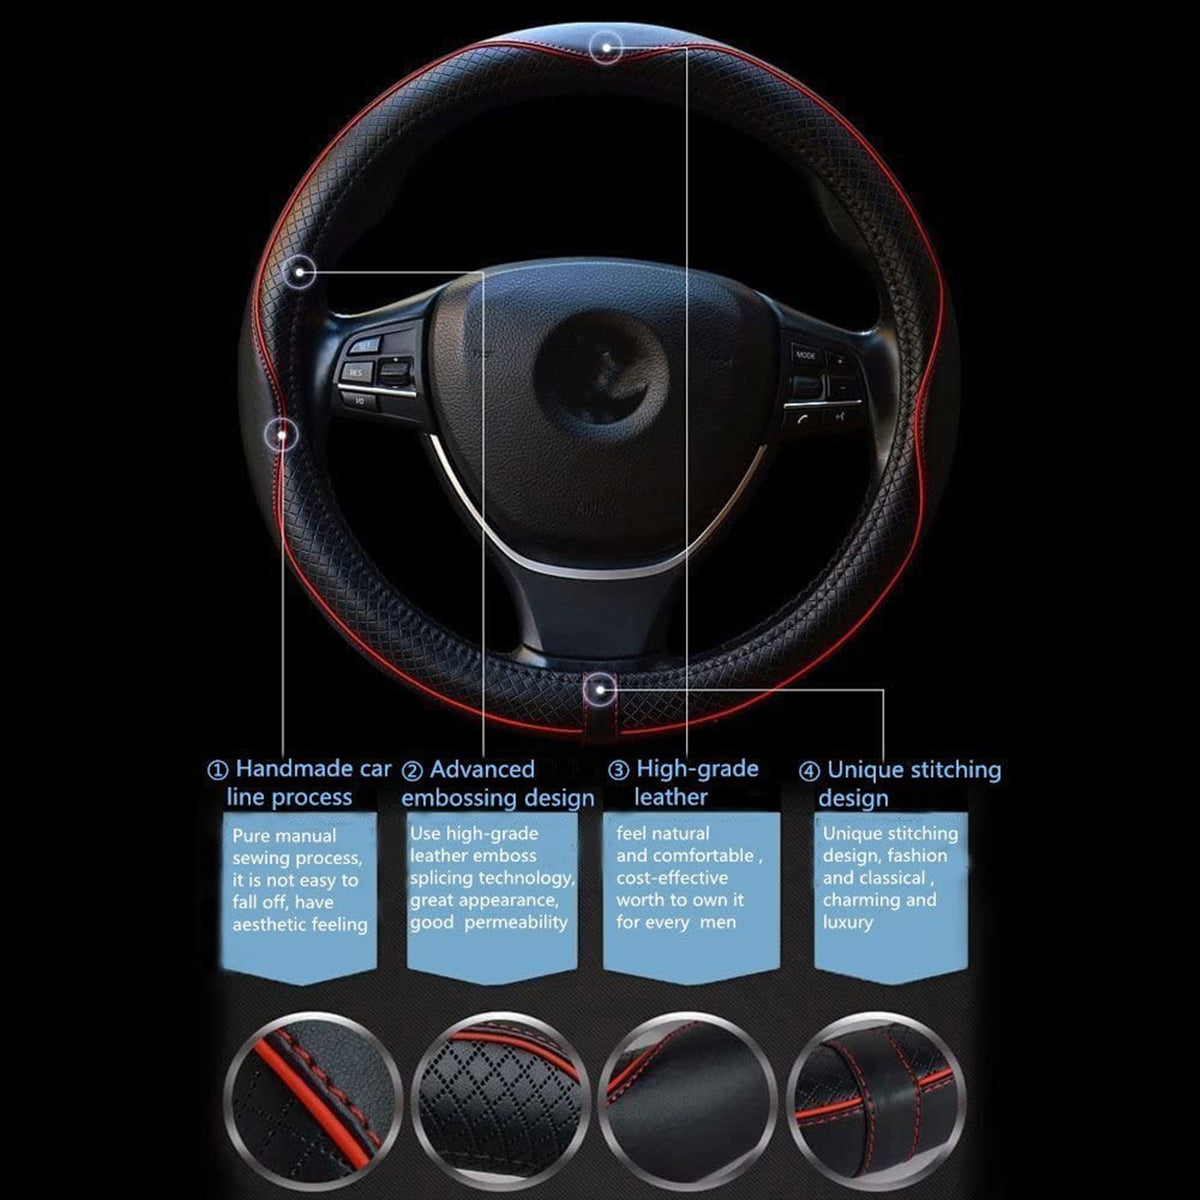 Car Steering Wheel Cover, Custom For Your Cars, Anti-Slip, Safety, Soft, Breathable, Heavy Duty, Thick, Full Surround, Sports Style, Car Accessories TS18990 - Delicate Leather